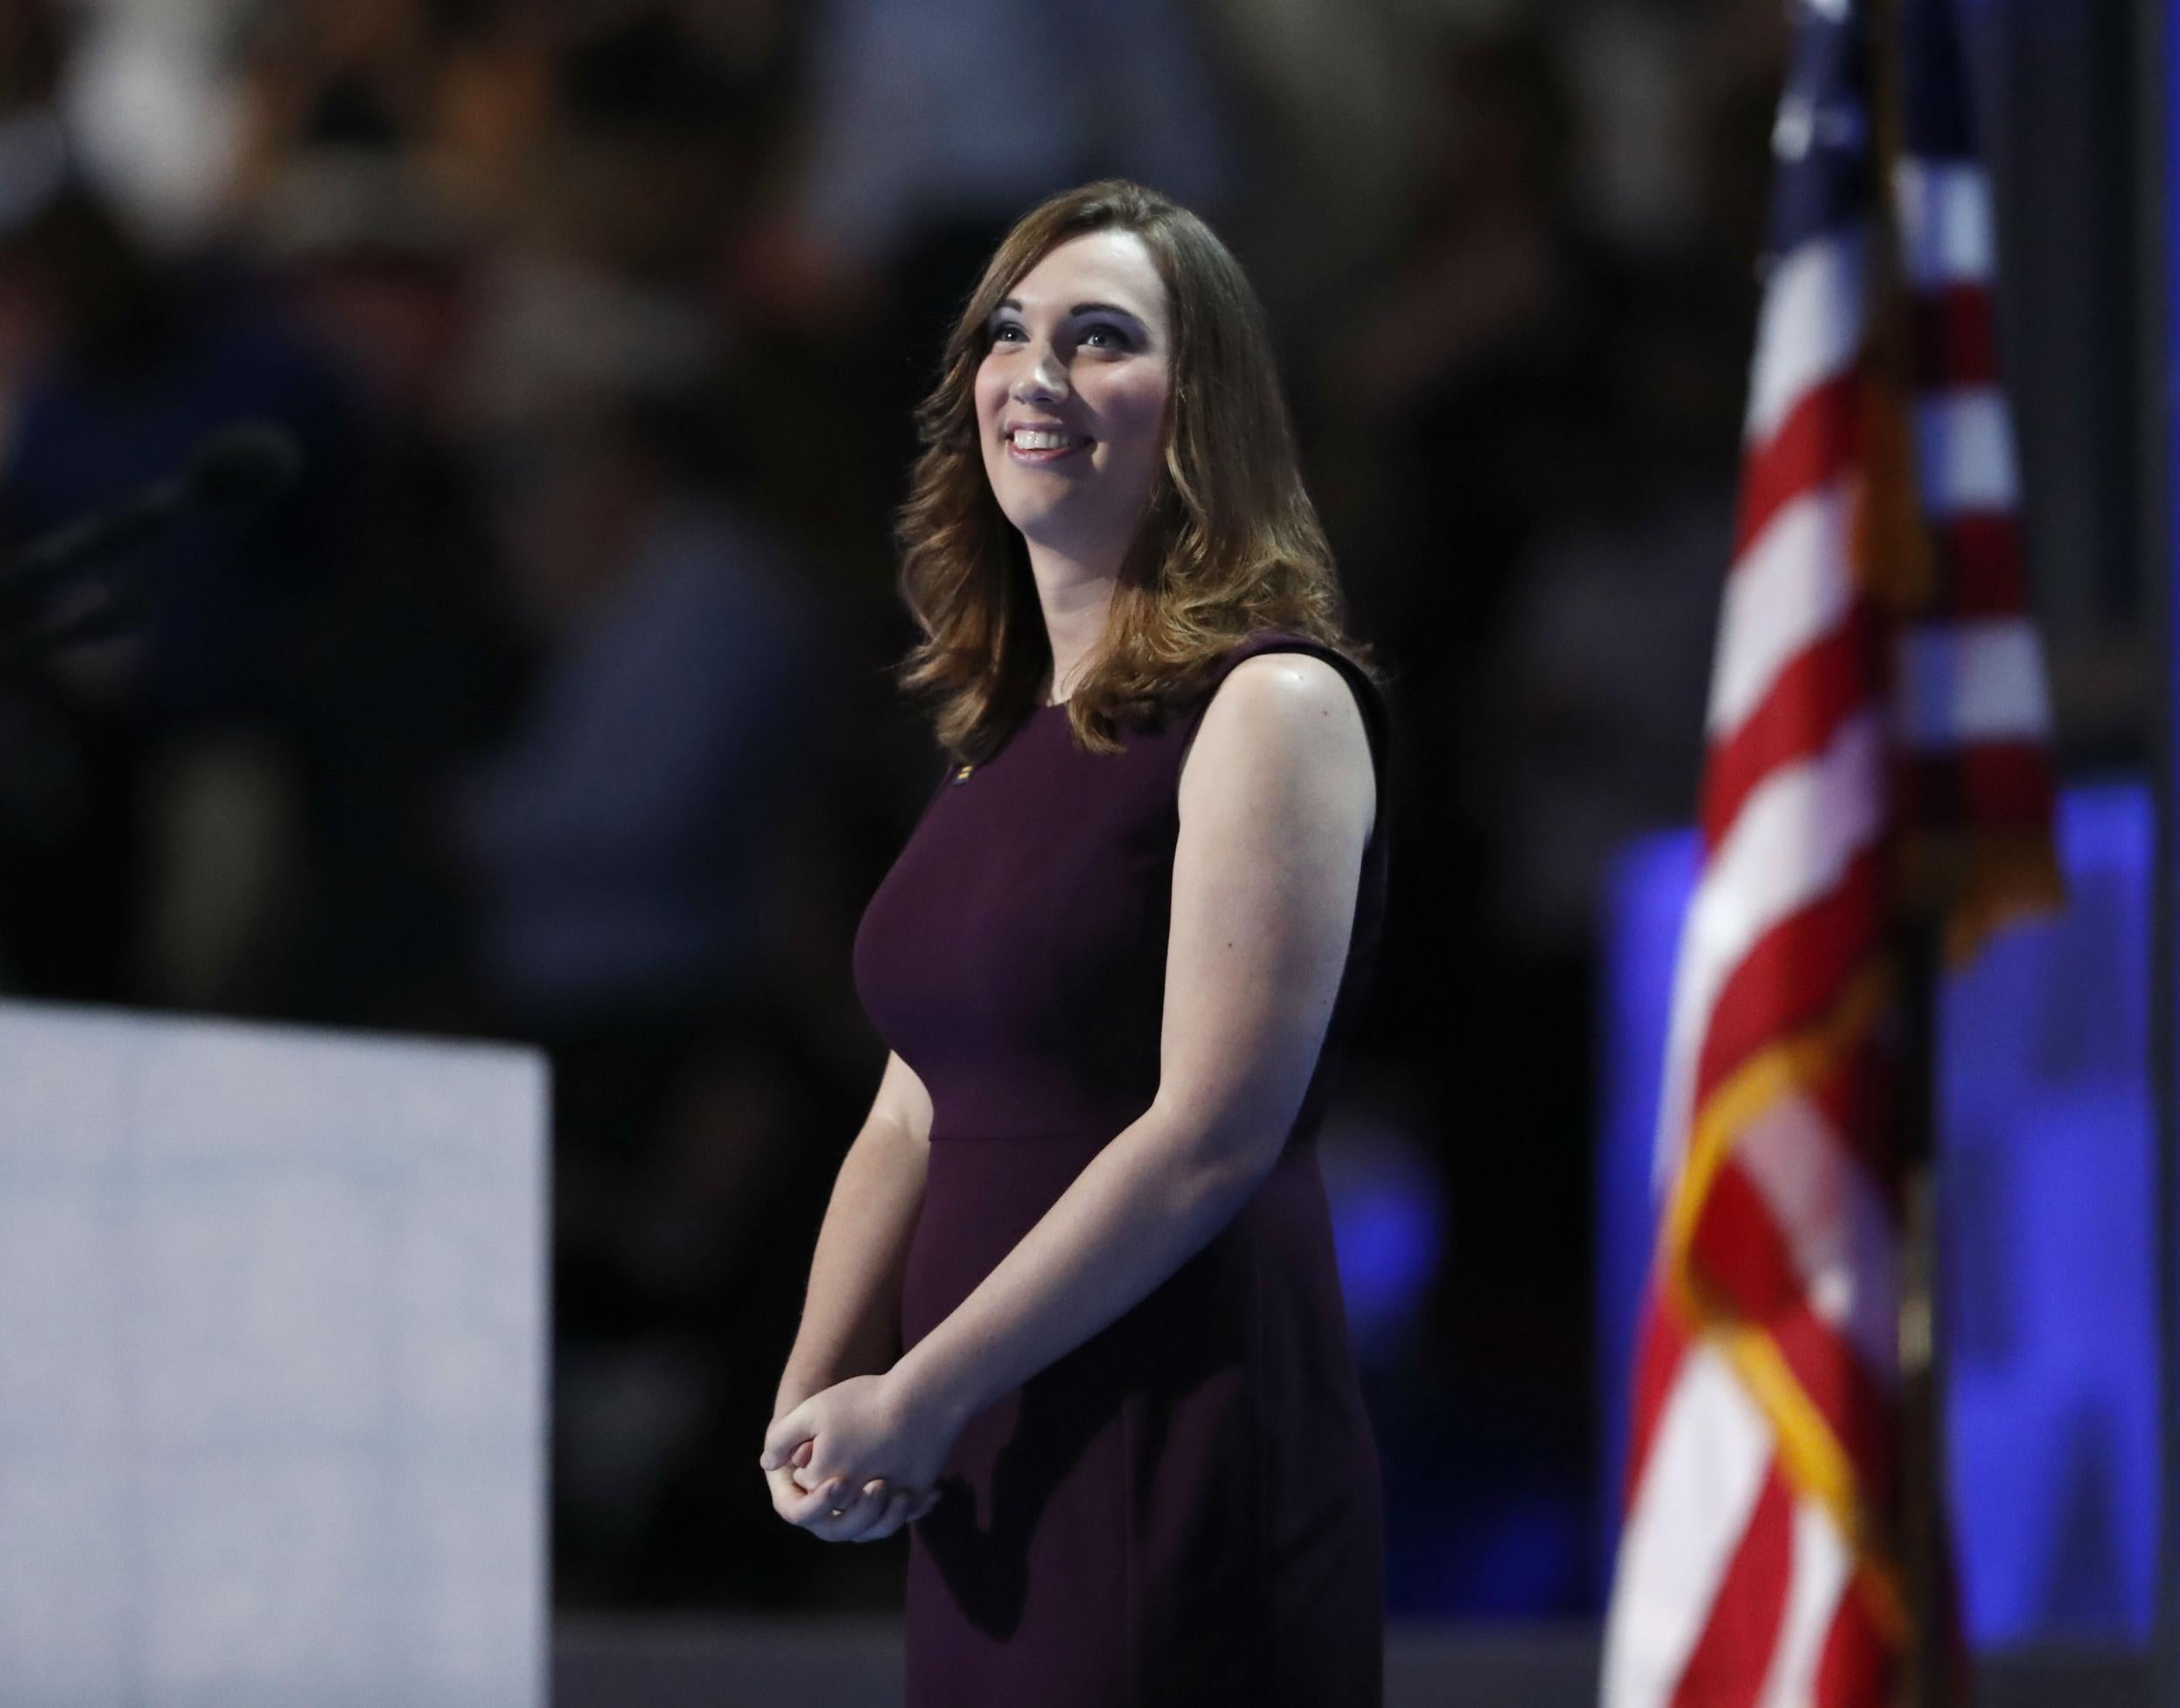 Sarah McBride has entered the footnotes of history